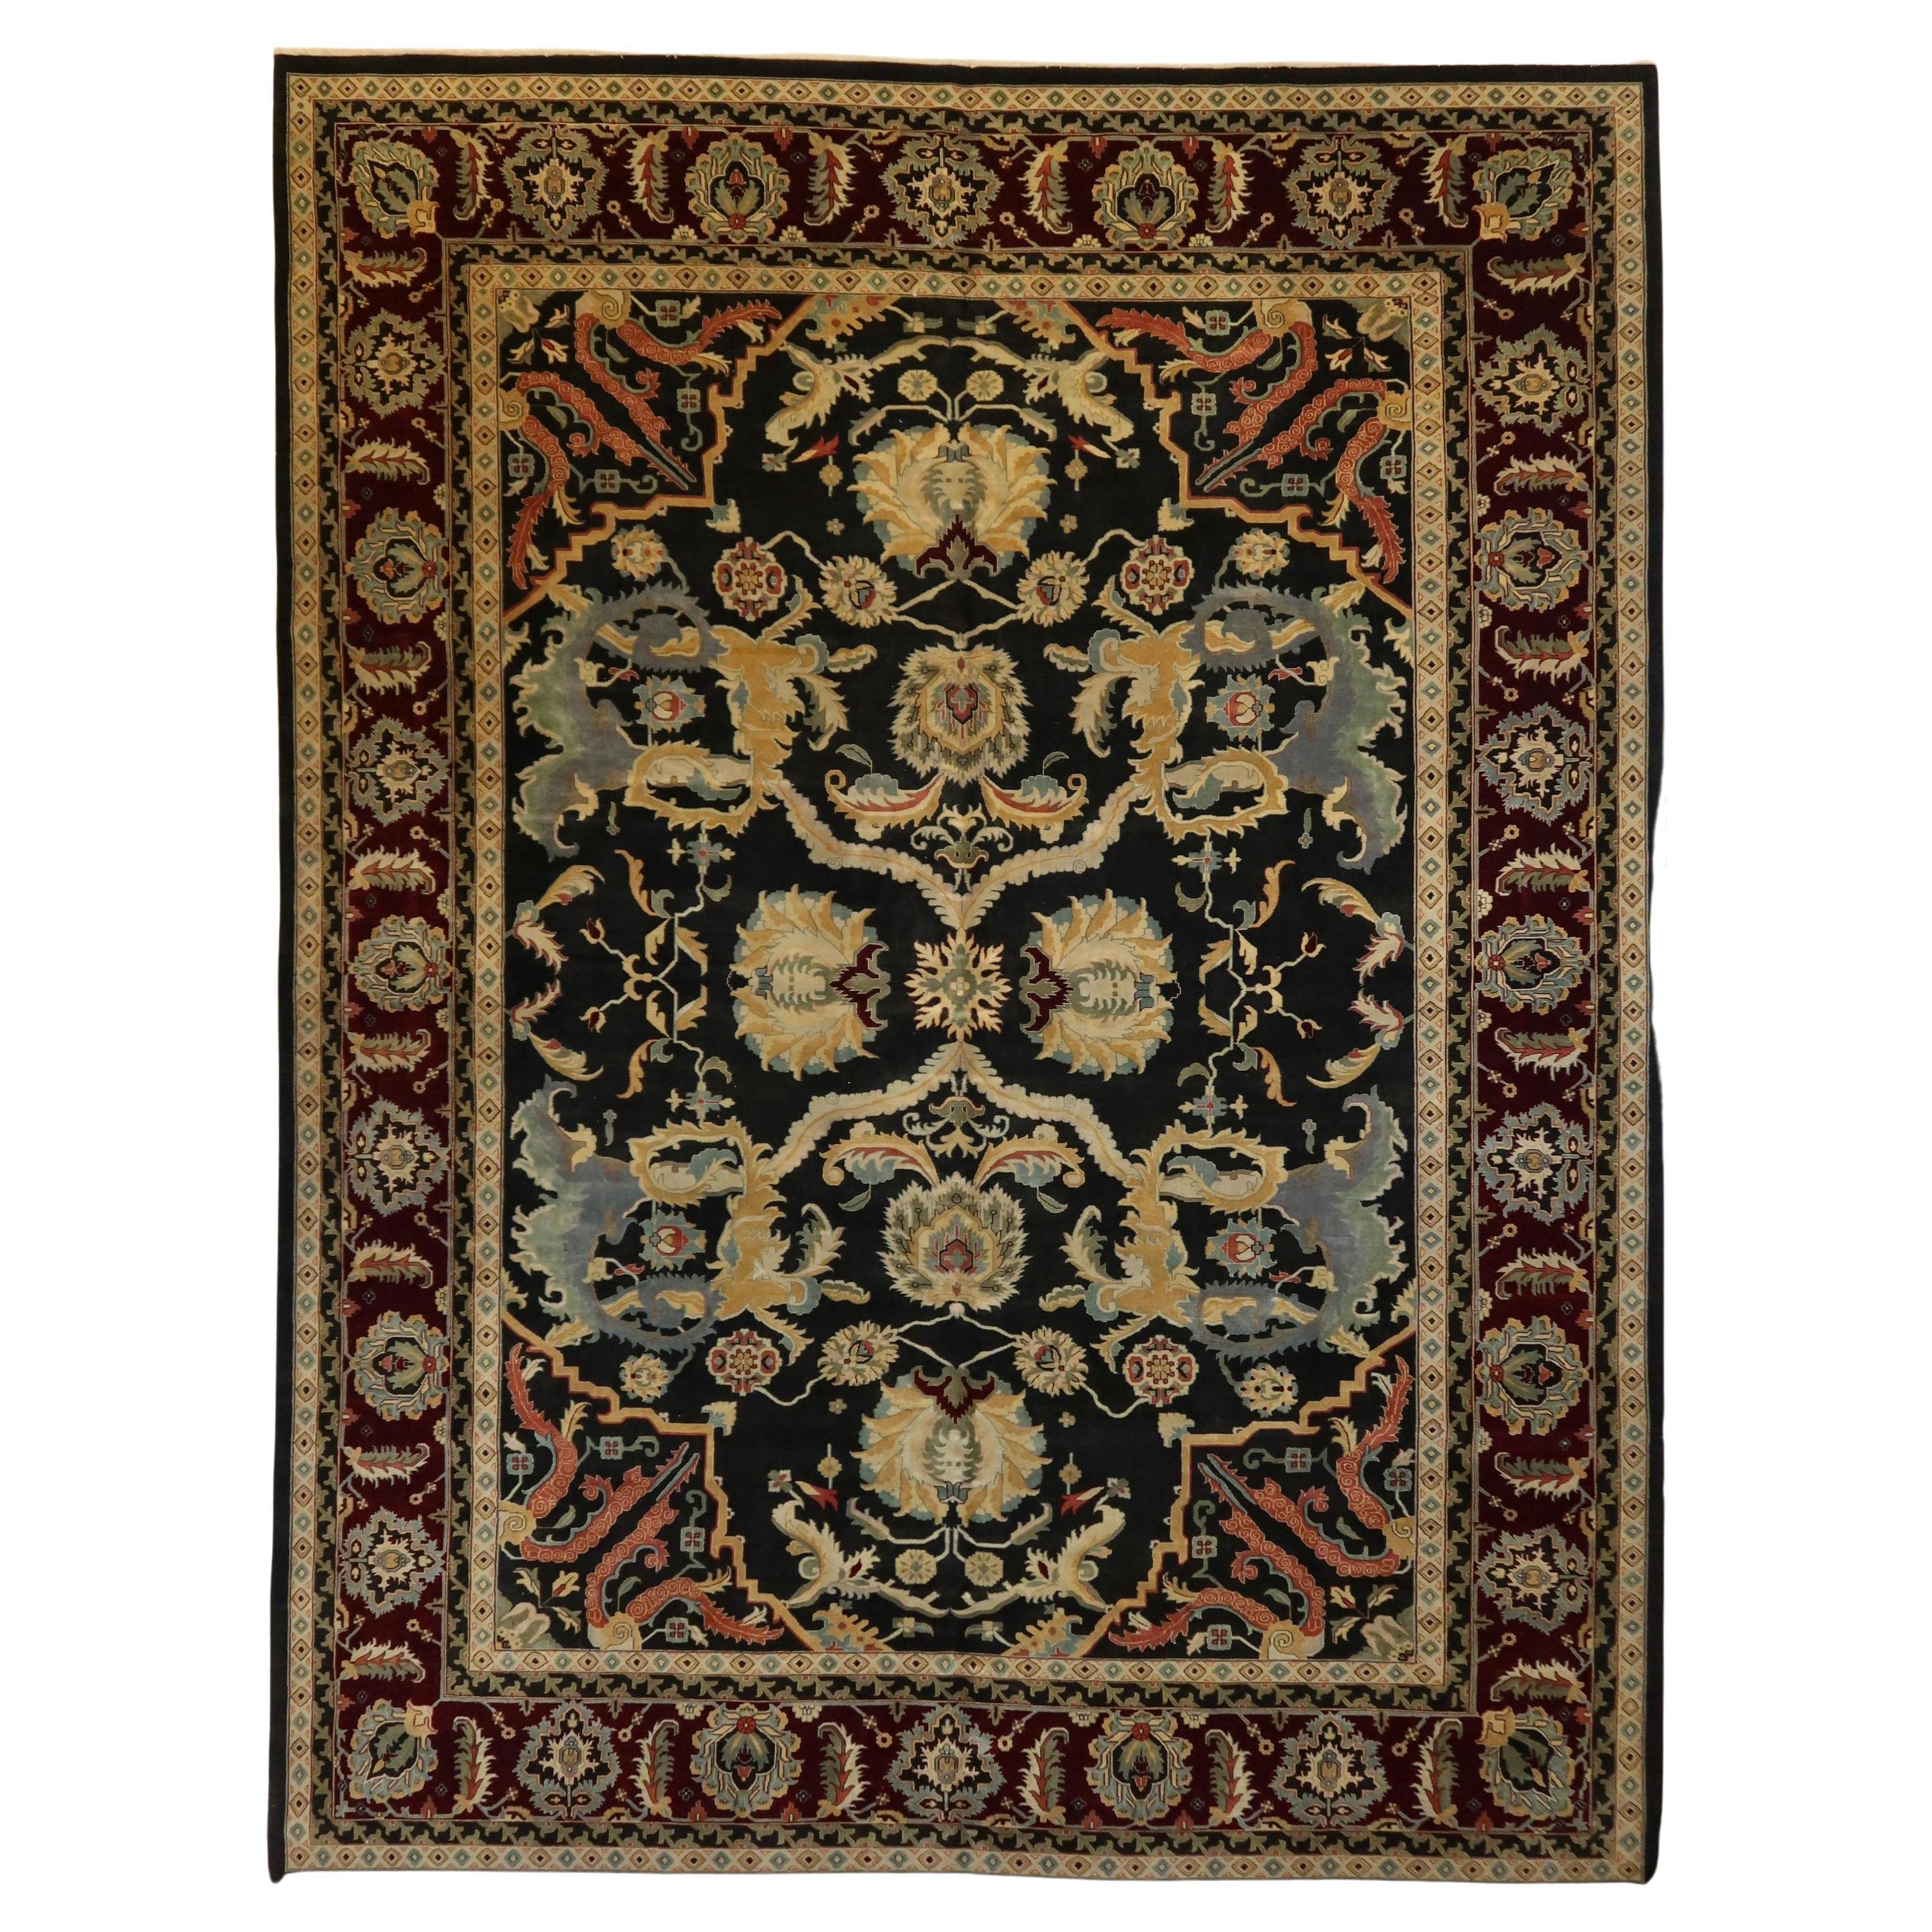 Agra Hand-Knotted NZ Wool Black Burgundy Finely Woven Oversize Fine Quality Rug